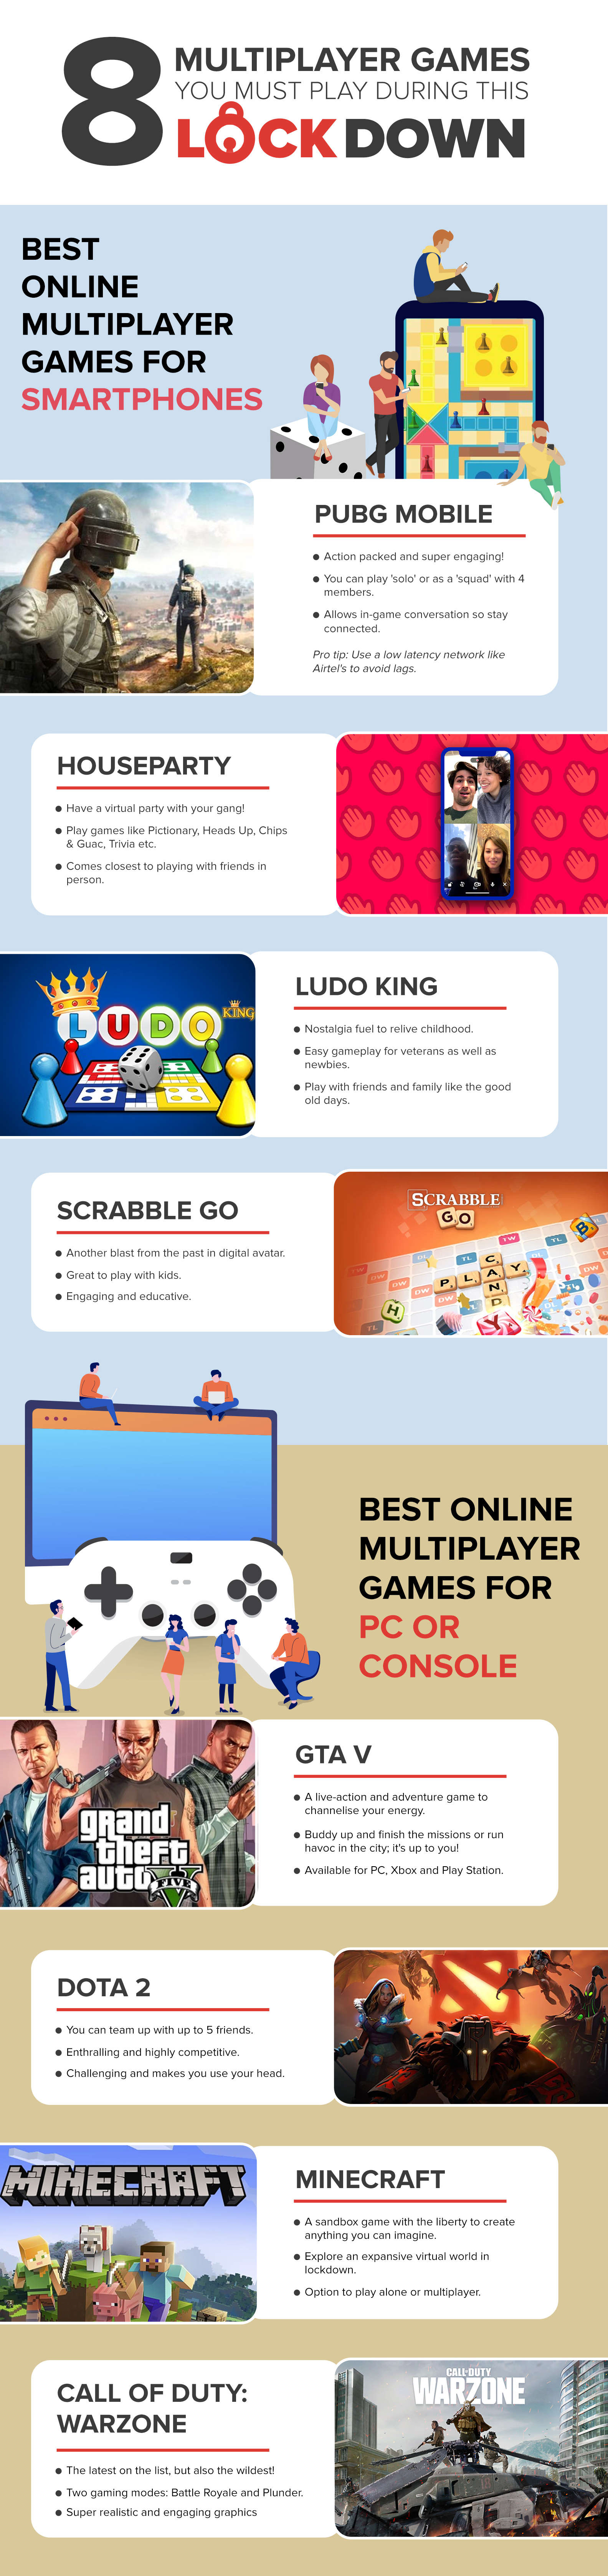 What are some of the most popular online multiplayer games? - Quora